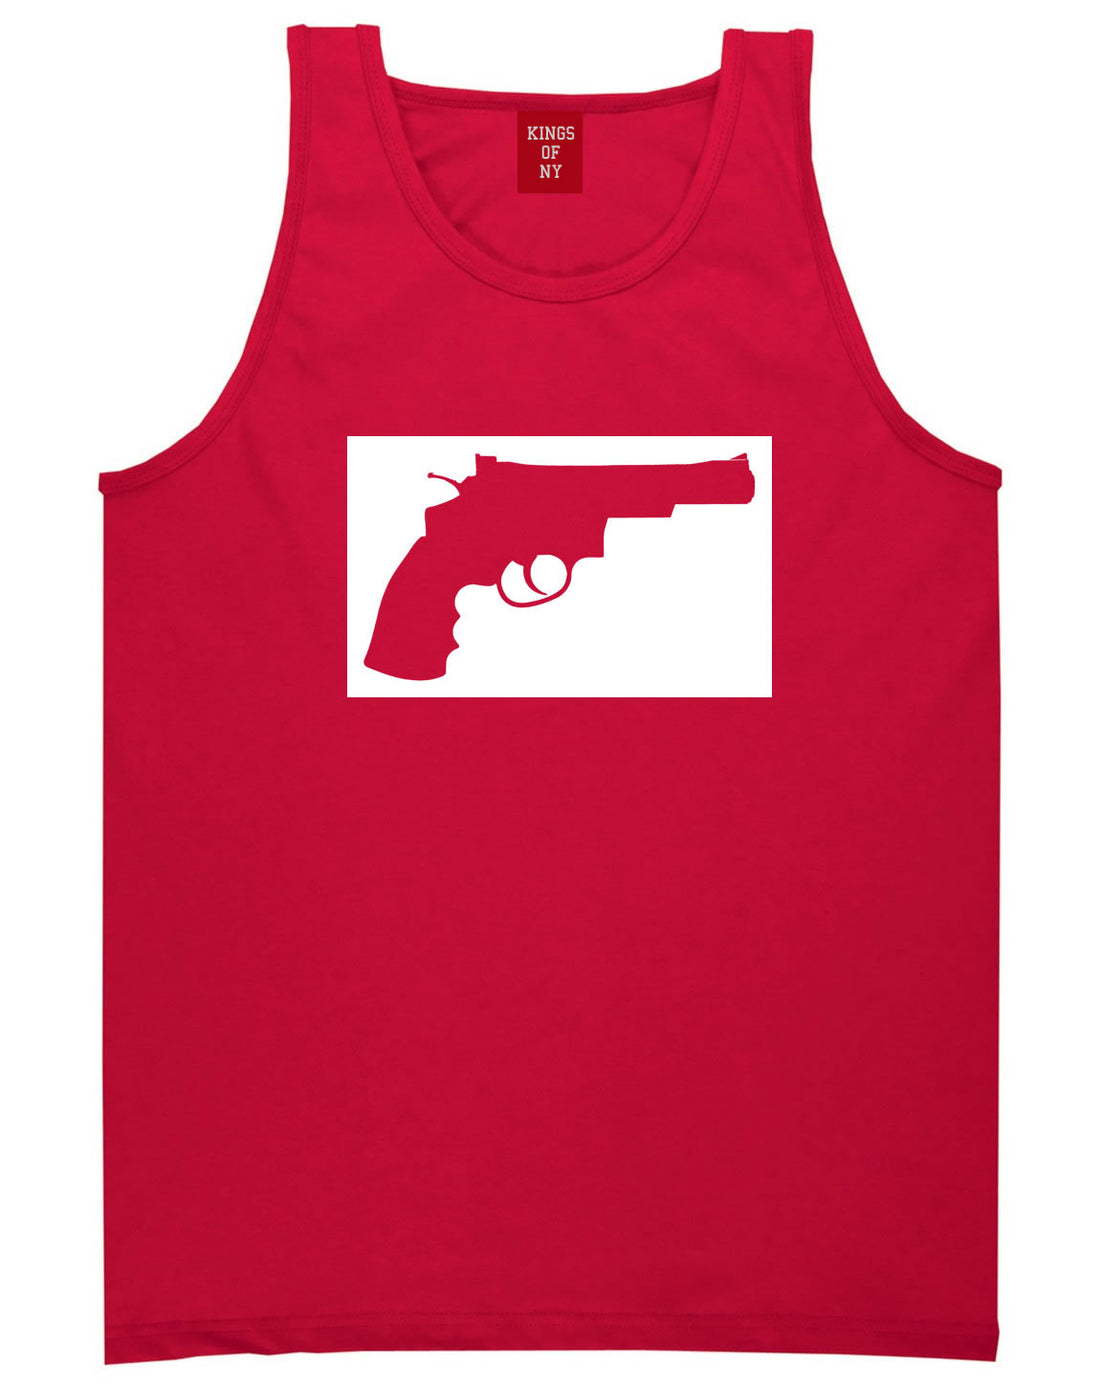 Gun Silhouette Revolver 45 Chrome Tank Top in Red By Kings Of NY